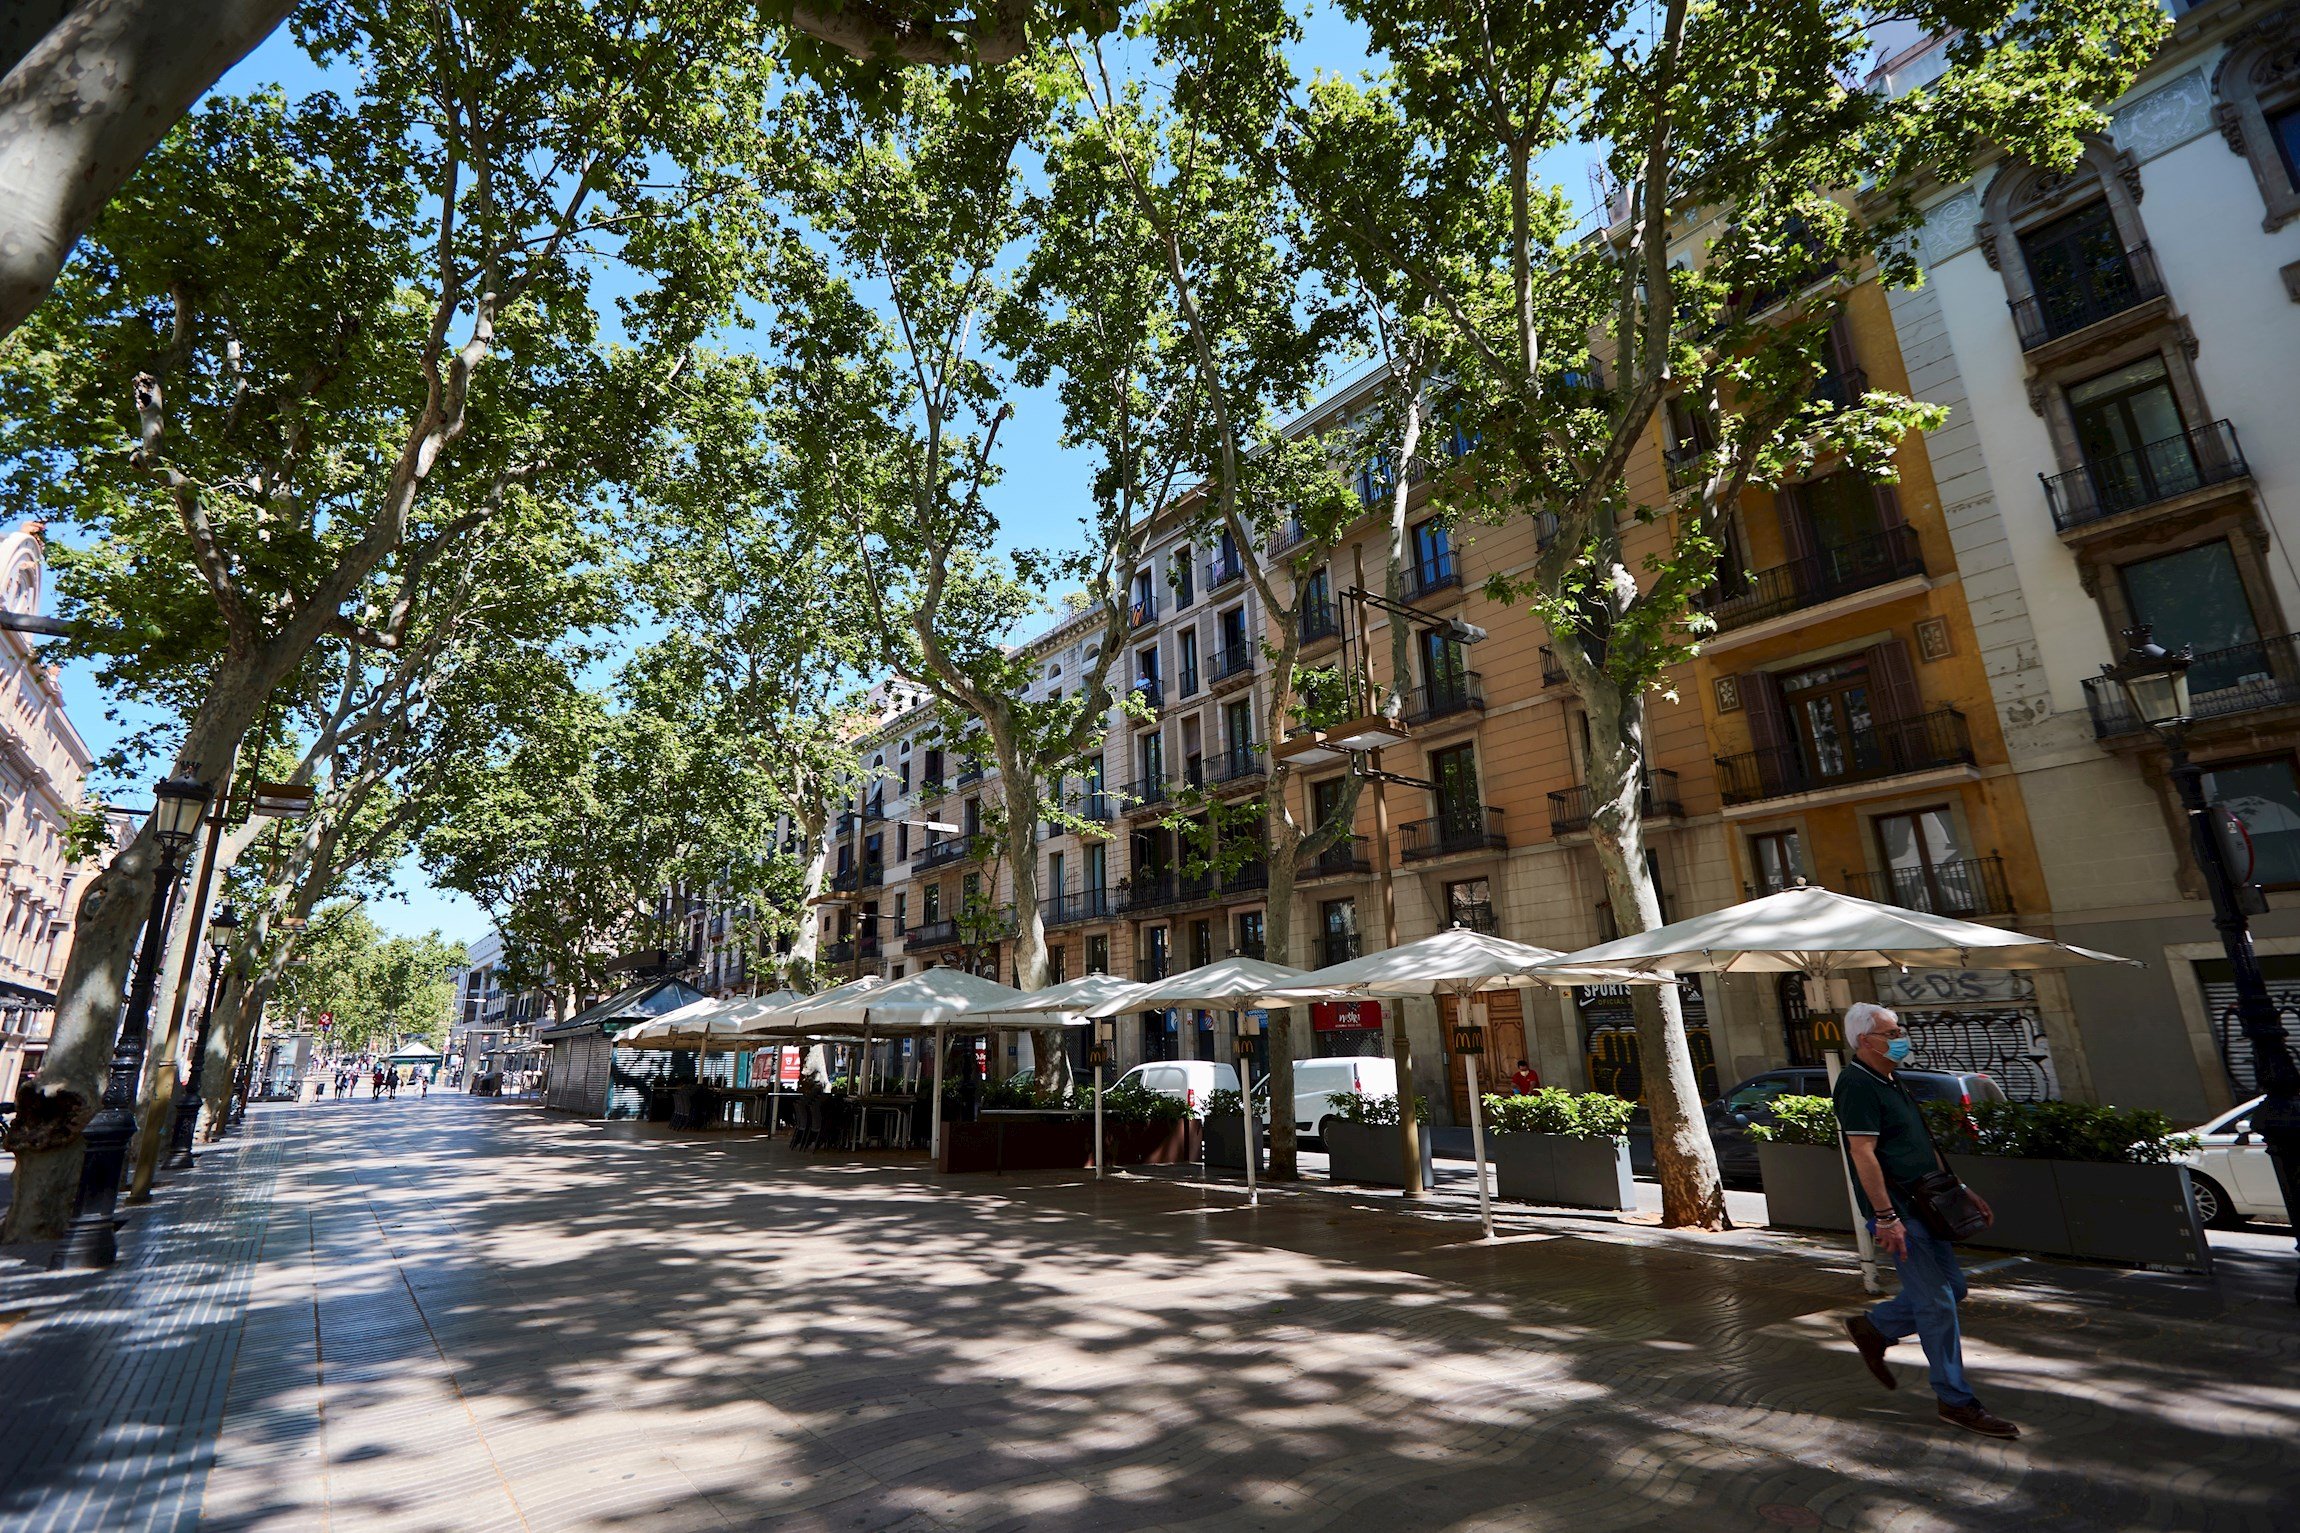 New rules will allow Barcelona to have more bar and restaurant terraces than ever